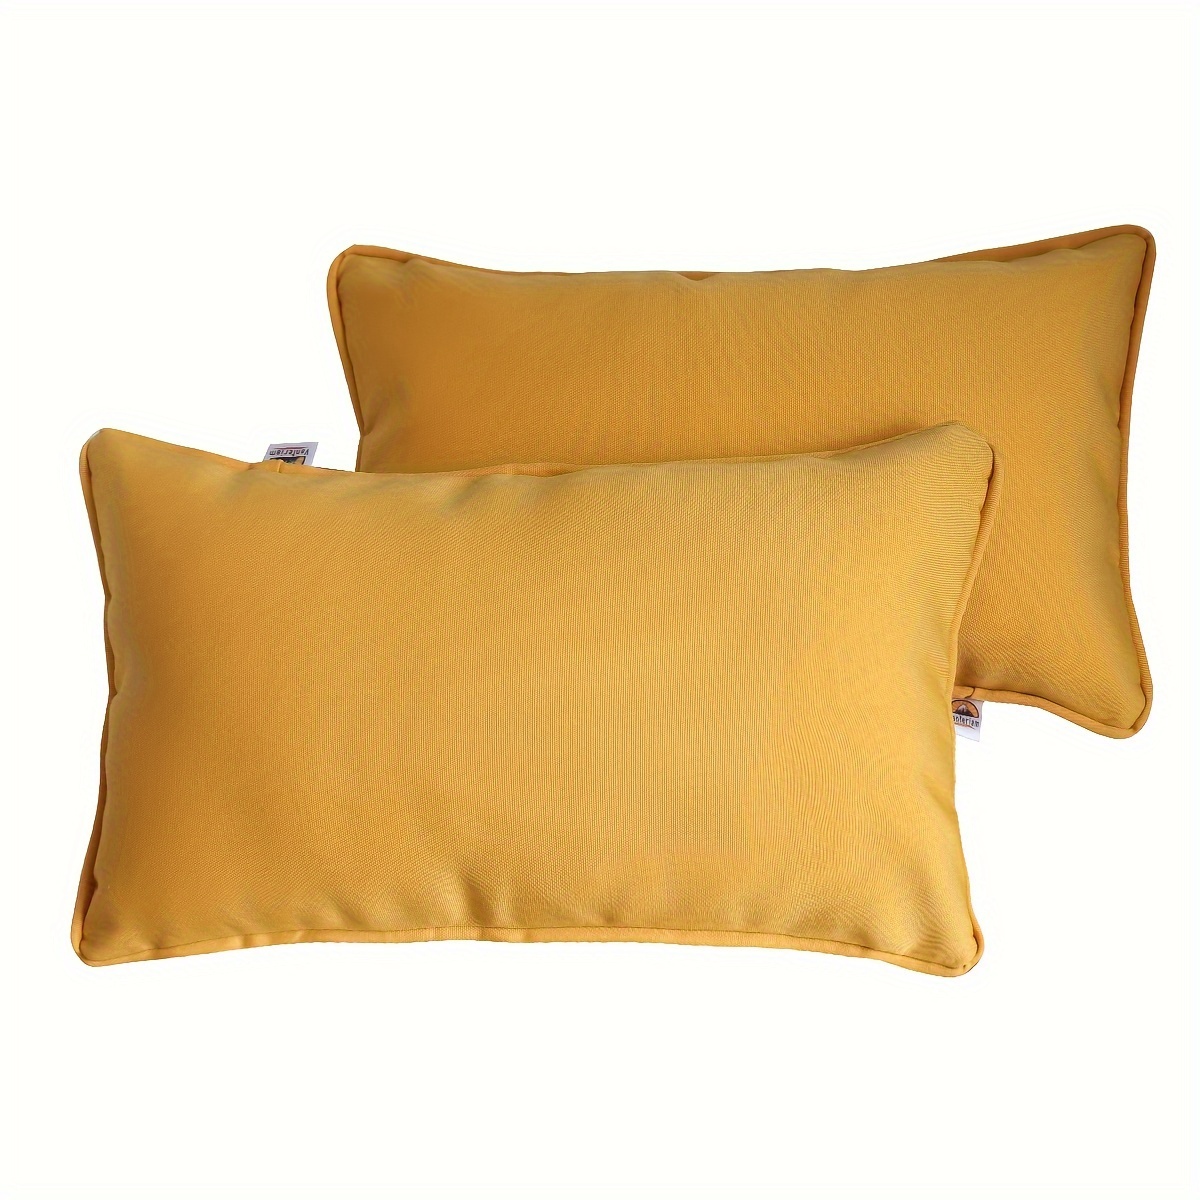 

Set Of 2 Outdoor Waterproof Fabric Lumbar Pillow Covers With Zipper Closure And Piped Edges, 12" X 20" - Mustard Yellow